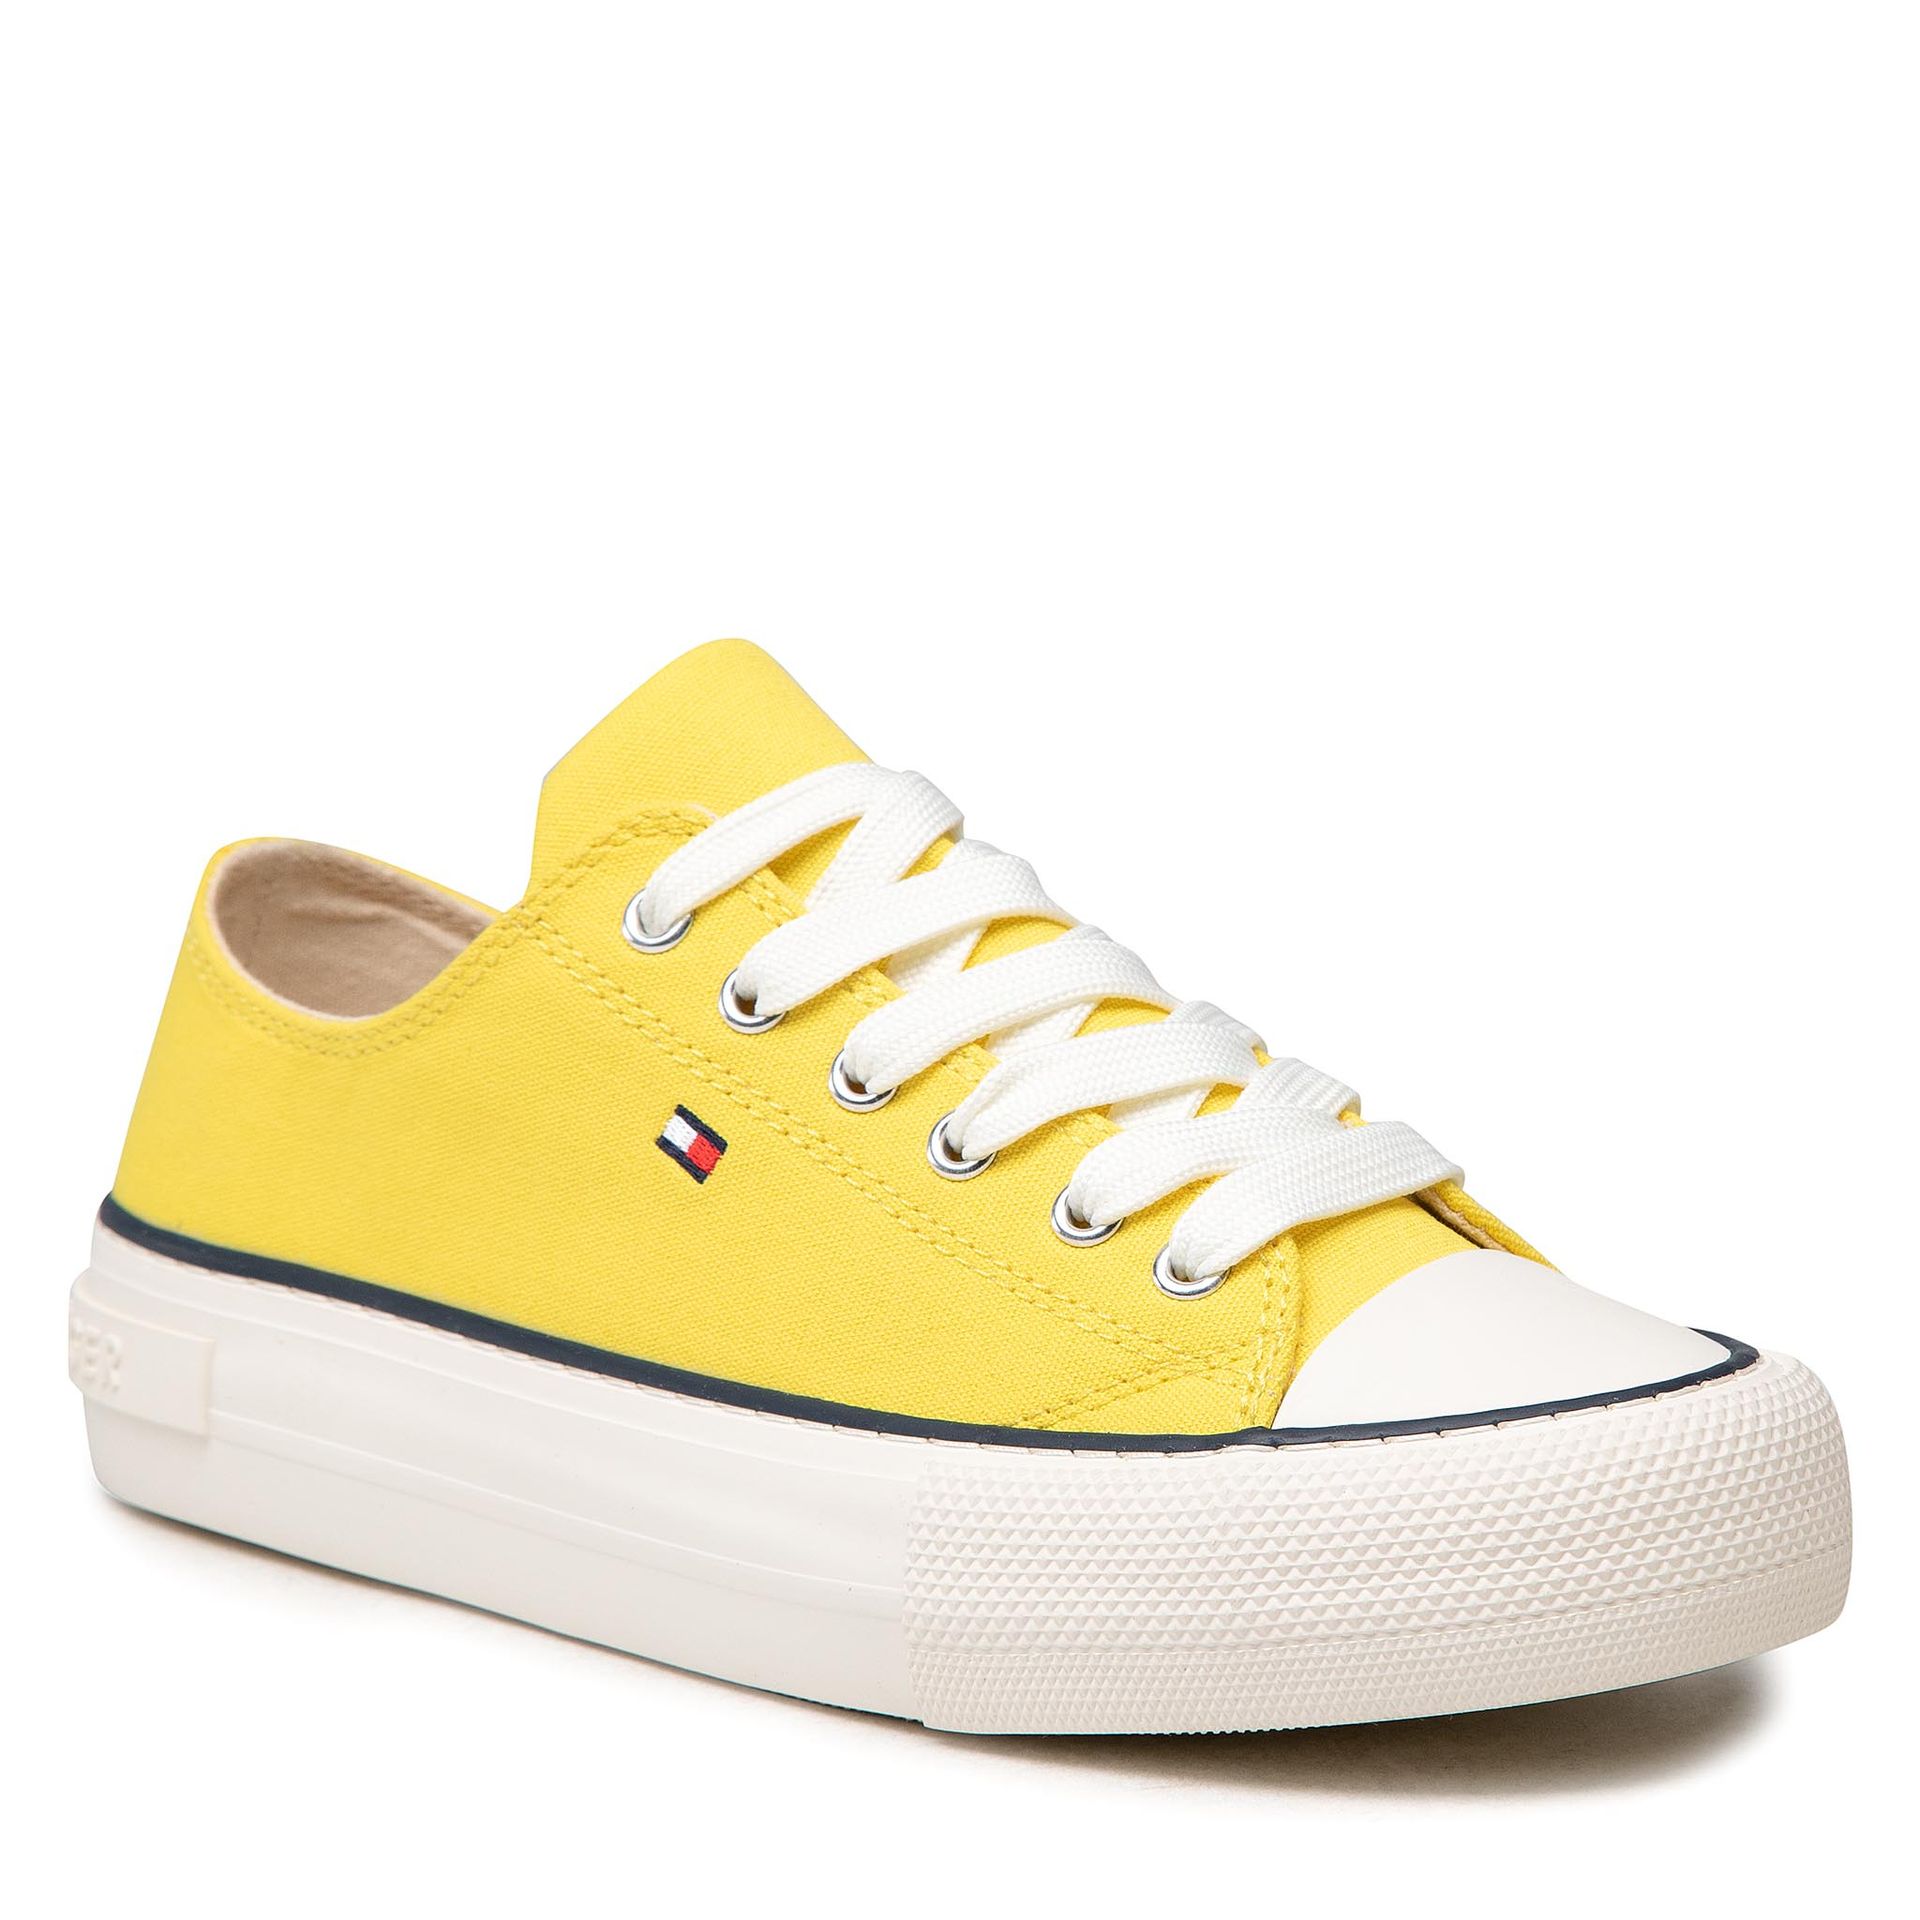 Tommy Hilfiger Trampki Low Cut Lace-Up Sneaker T3A4-32118-0890 S Yellow 200 Trampki Low Cut Lace-Up Sneaker T3A4-32118-0890 S Yellow 200